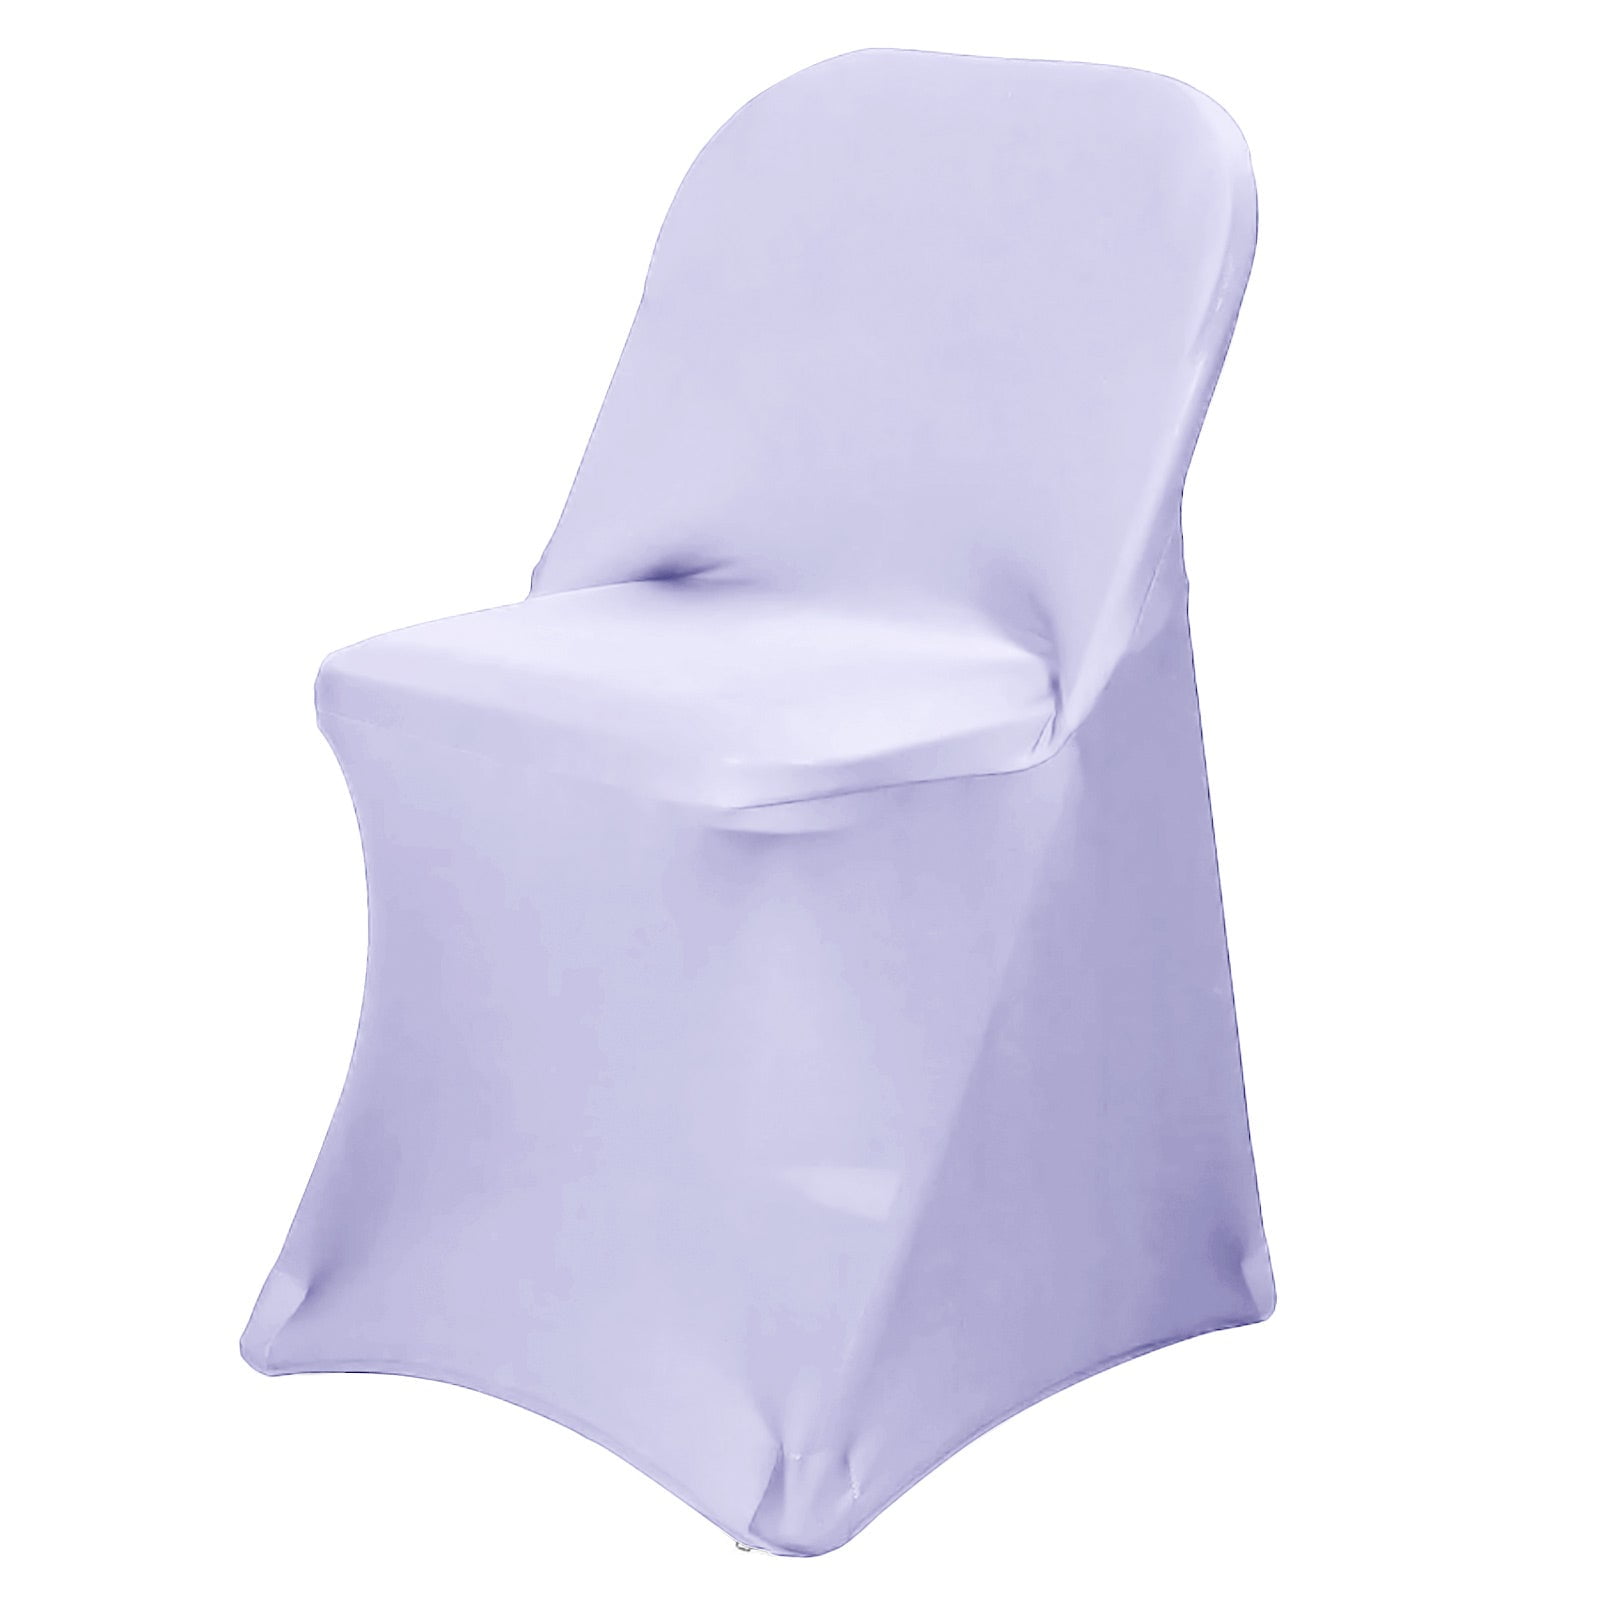 Efavormart Stretchy Spandex Fitted Folding Chair Cover Dinning Event  Slipcover For Wedding Party Banquet Catering - White